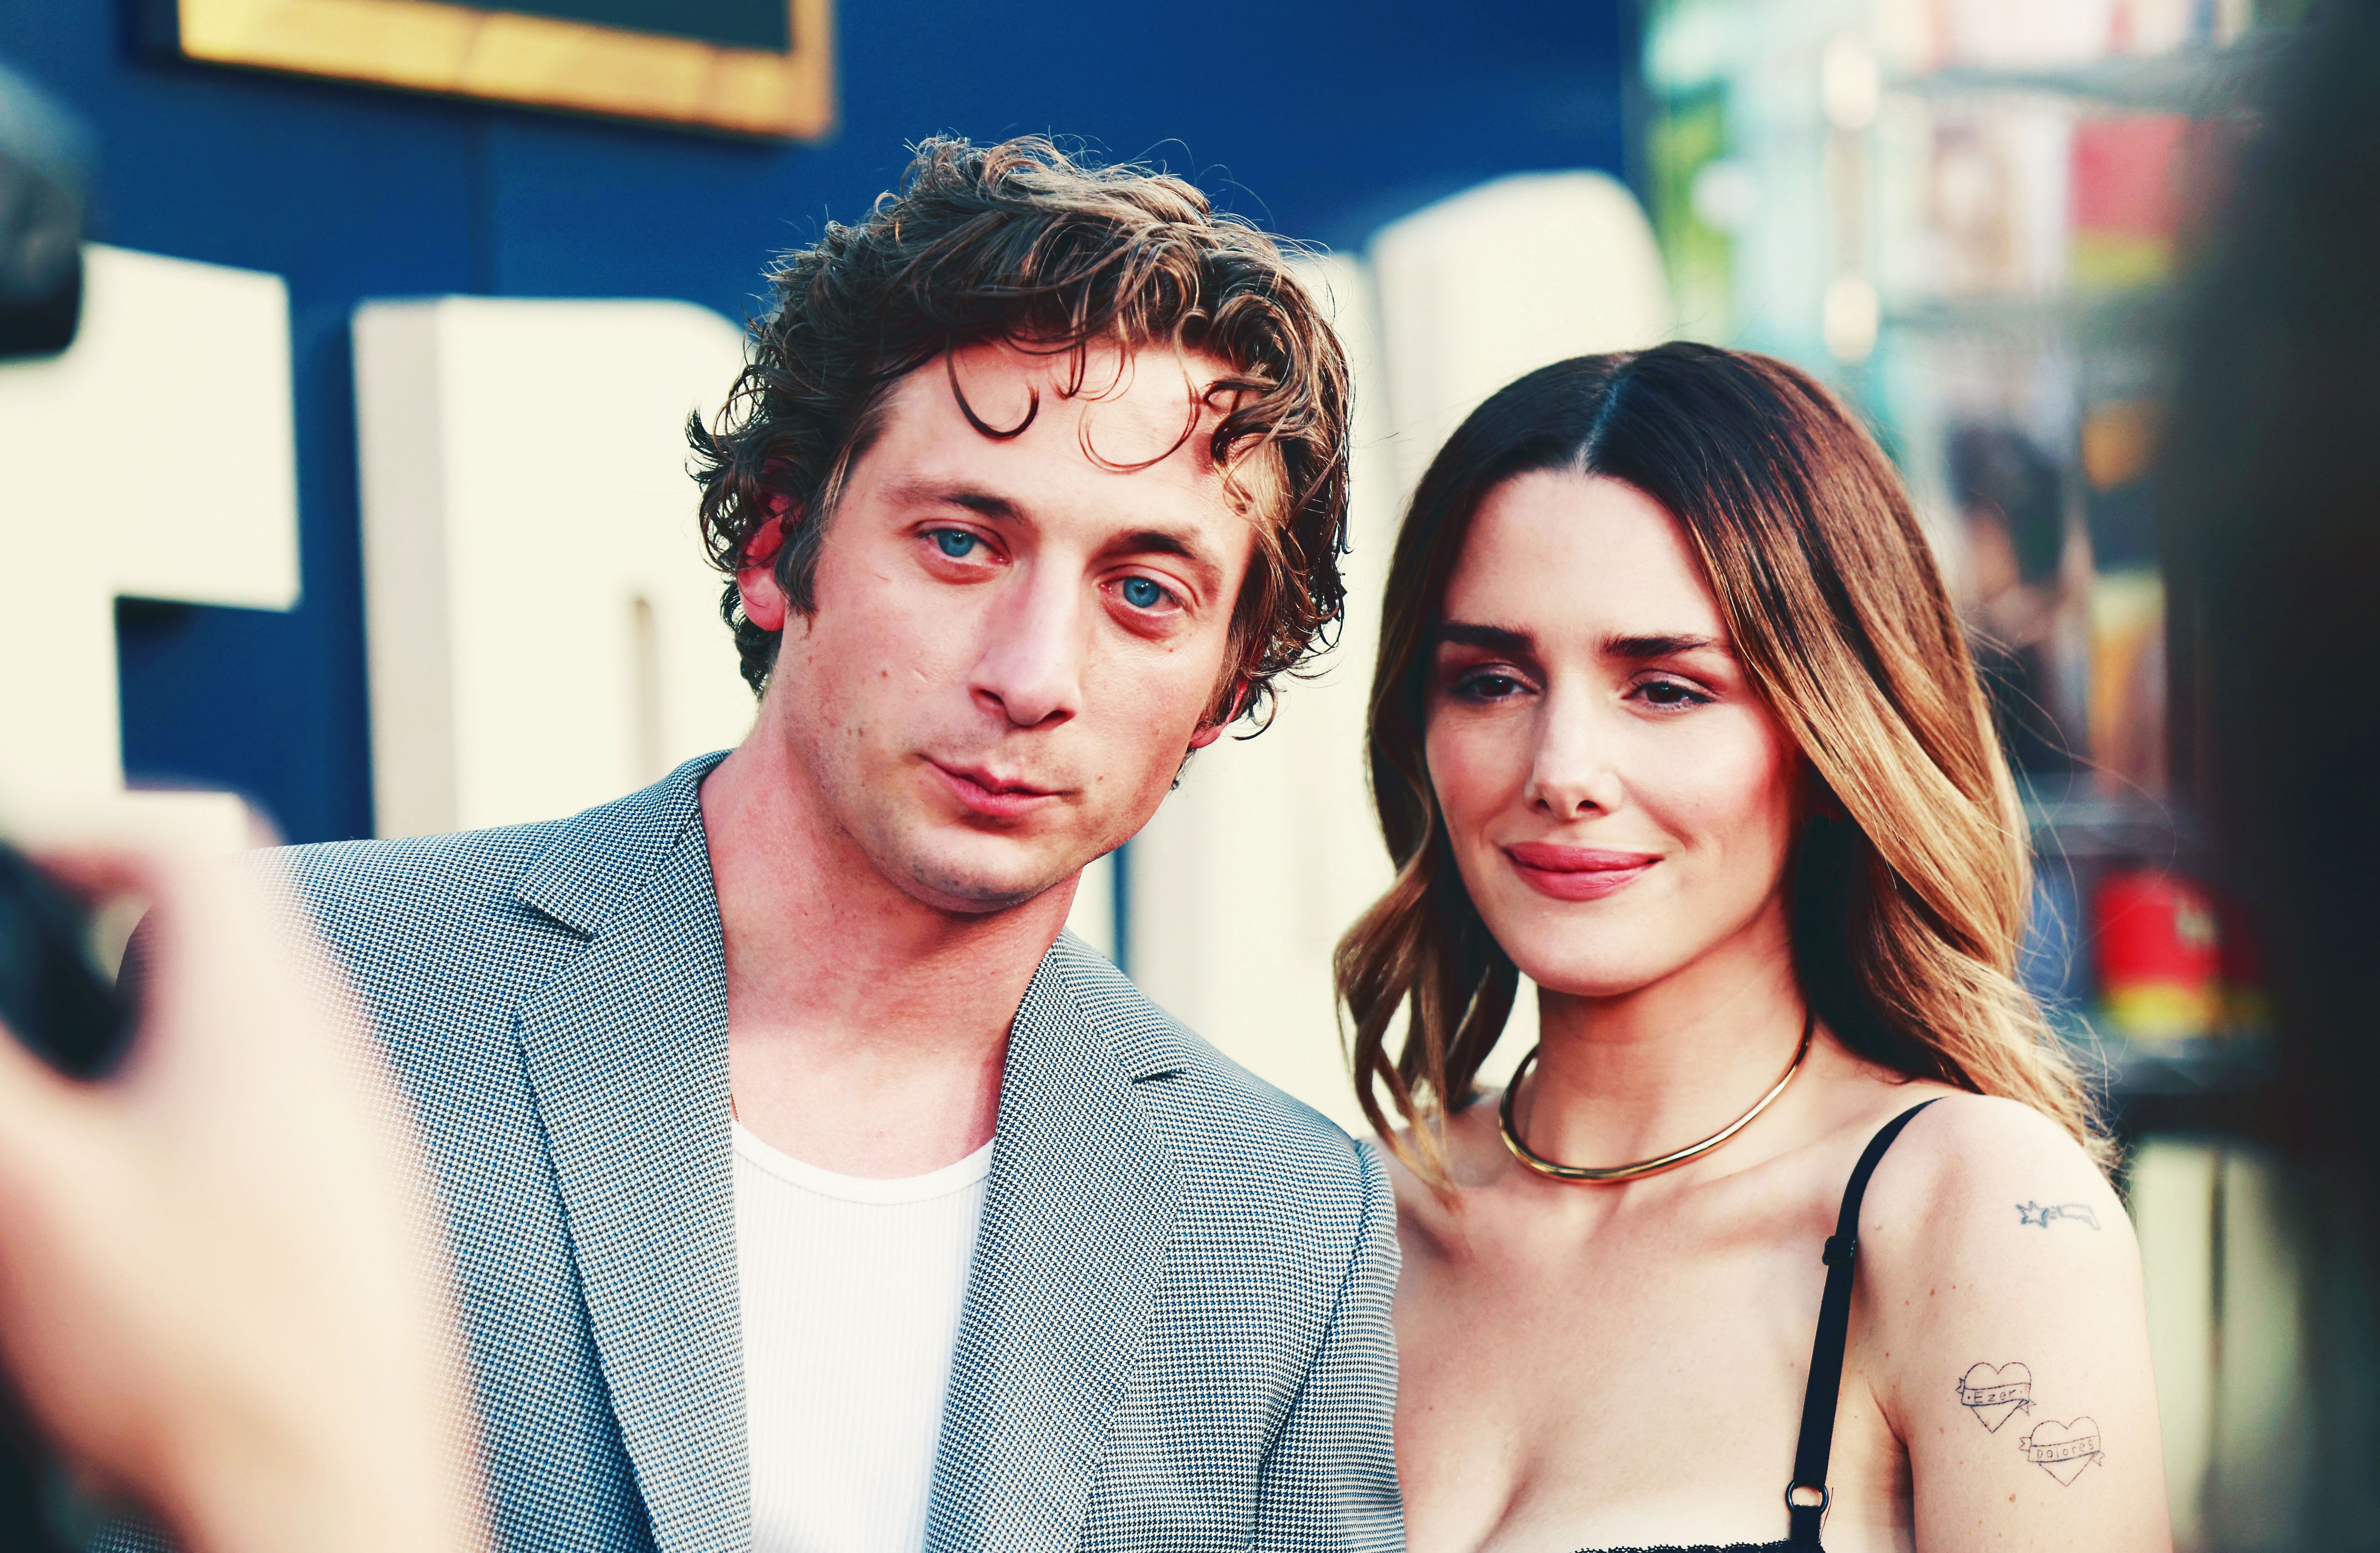 Jeremy Allen White and Addison Timlin Are Getting Divorced